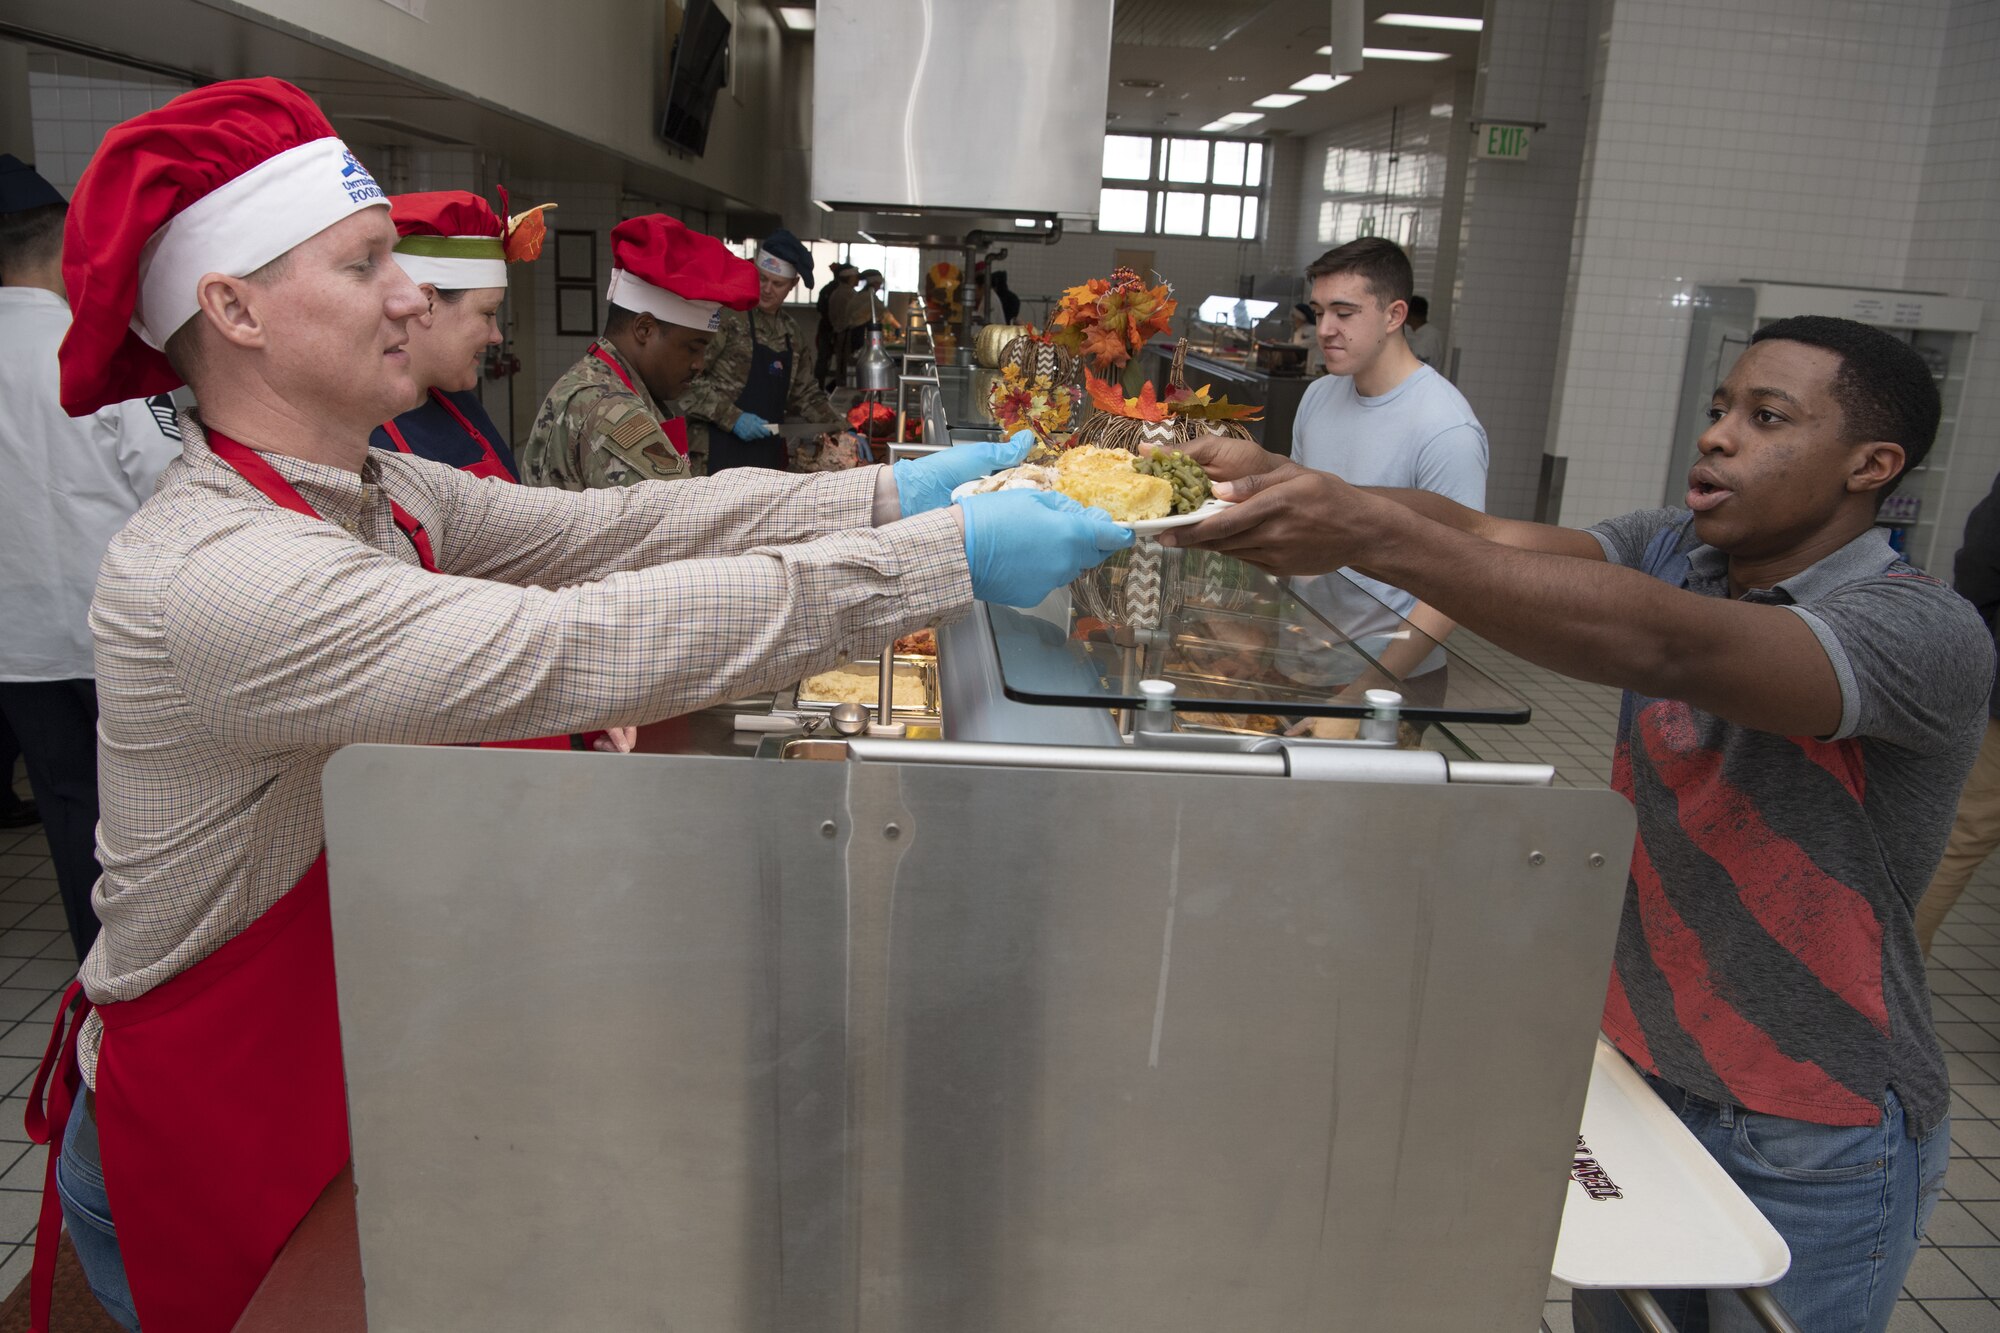 Maj. Ryan Abel, 374th Comptroller Squadron commander, serves Thanksgiving meals to service members and families at the Samurai Café Dining Facility at Yokota Air Base, Japan, Nov. 24, 2022. U.S. Ambassador to Japan Rahm Emanuel, U.S. Air Force Lt. Gen. Ricky Rupp, Commander of U.S. Forces Japan and Fifth Air Force, and 374th Airlift Wing leadership took time to serve and celebrate Thanksgiving Day alongside service members and families assigned to Yokota. (U.S. Air Force photo by Tech. Sgt. Christopher Hubenthal)